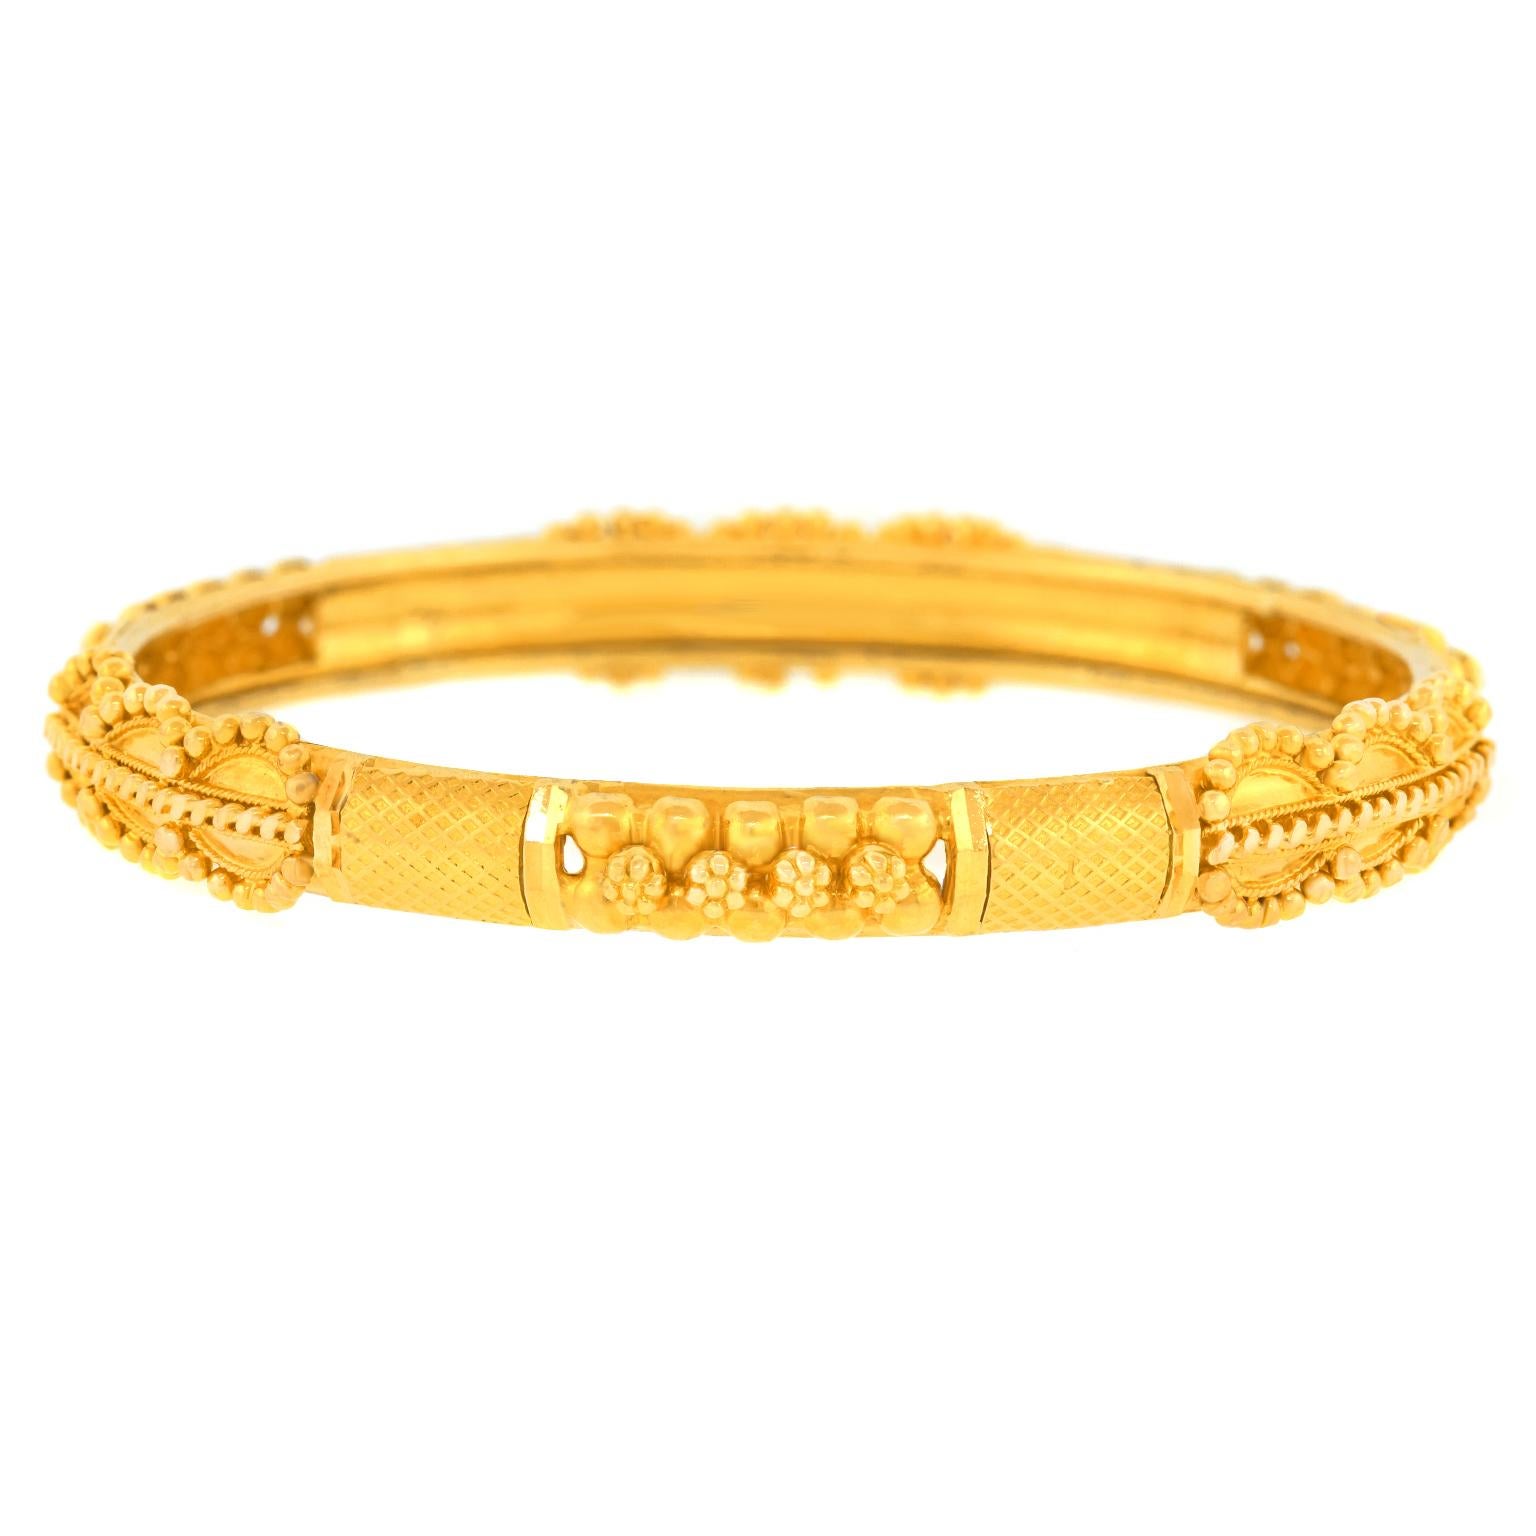 High Karat Gold Bangle In Excellent Condition For Sale In Litchfield, CT